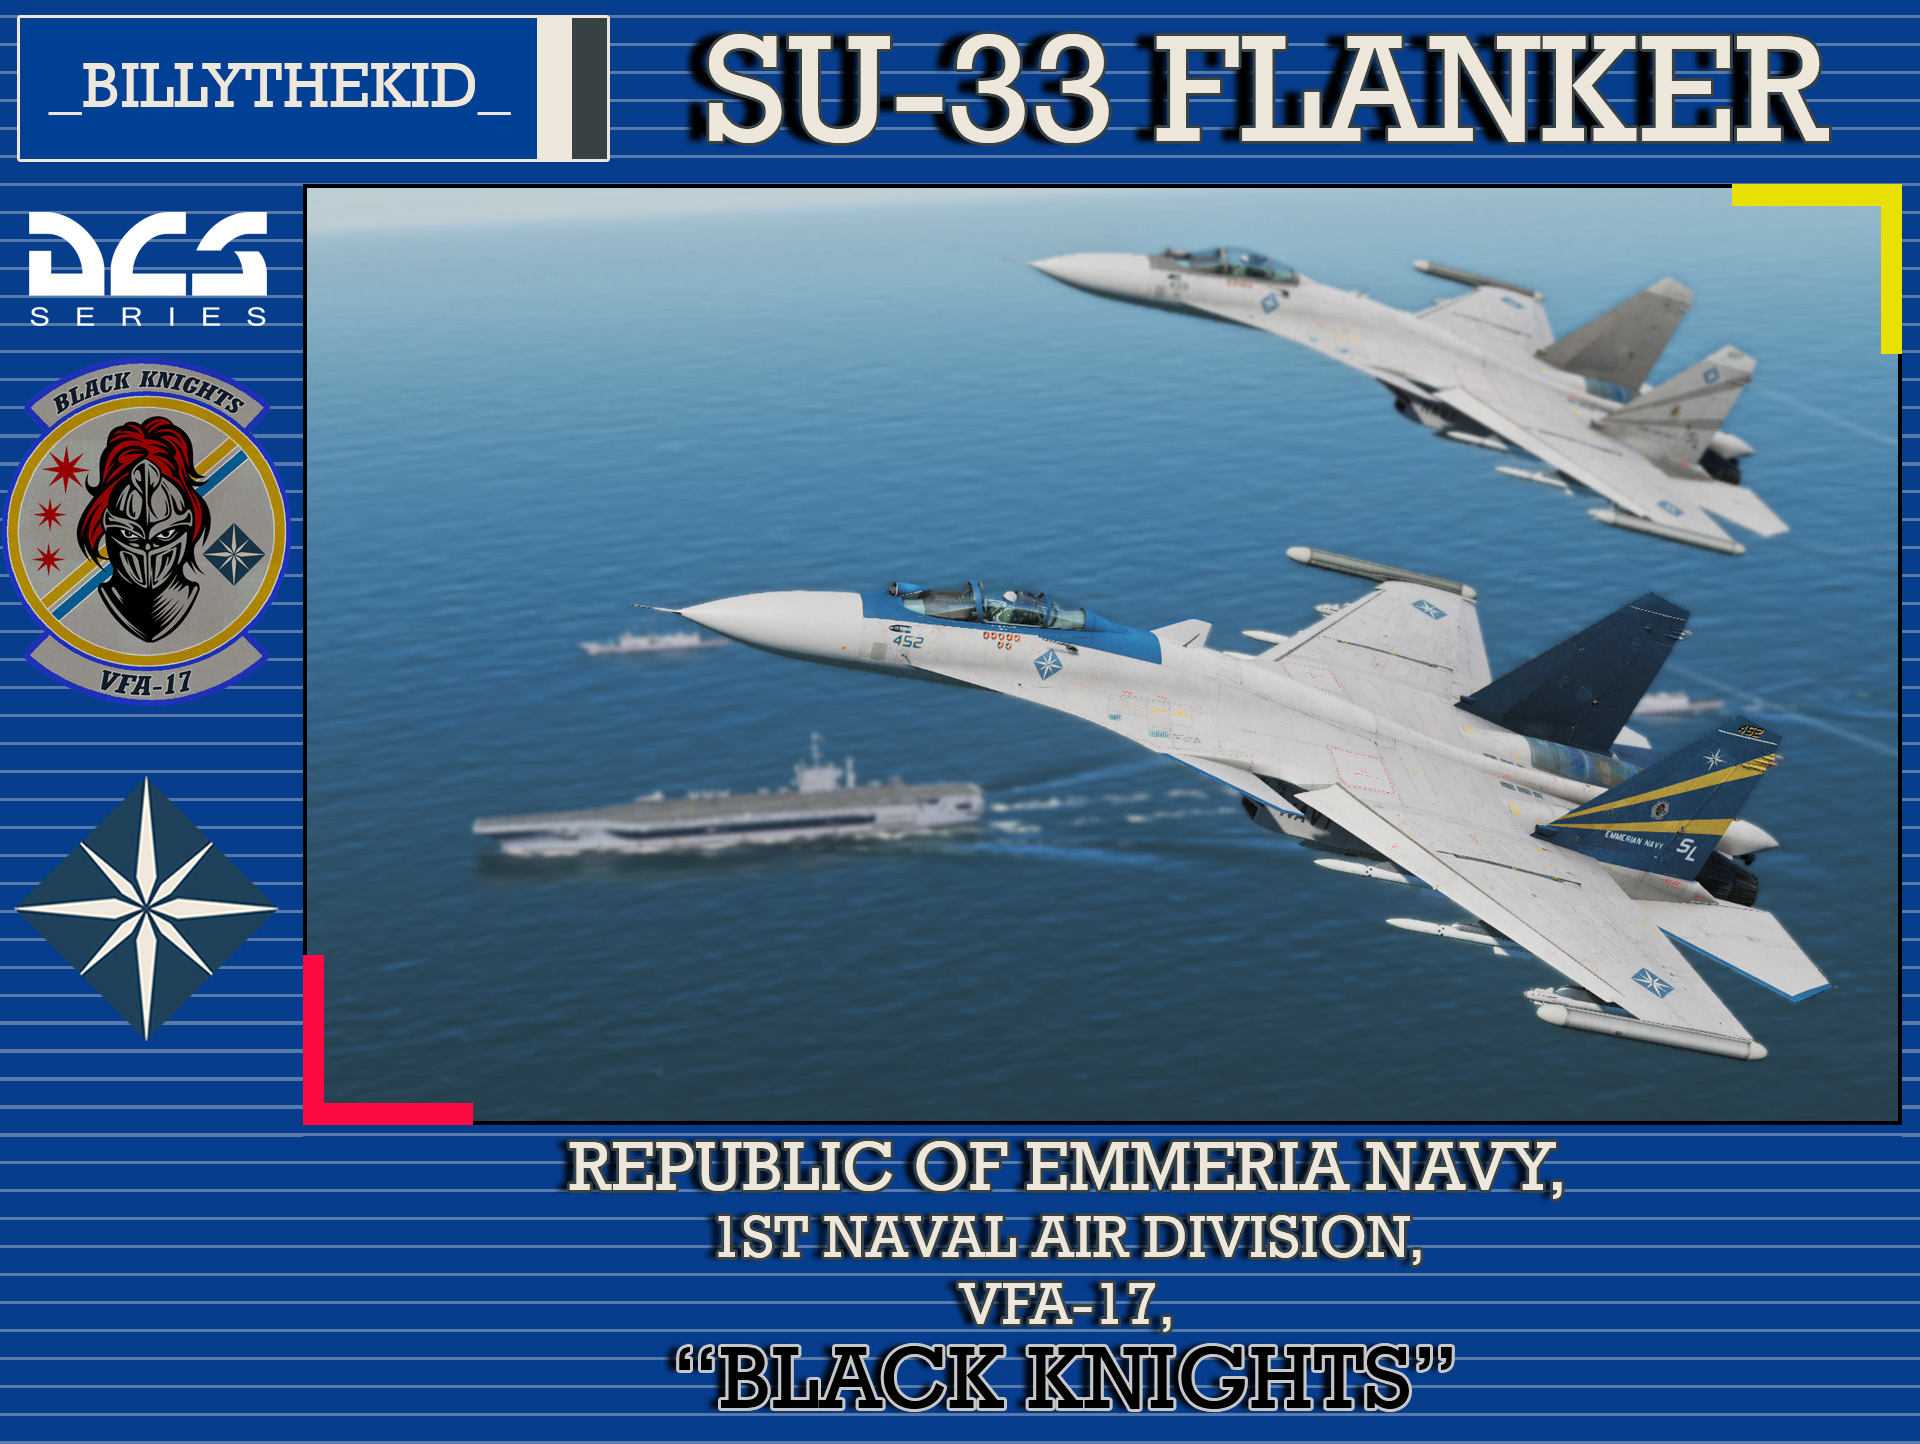 Ace Combat - Republic of Emmeria Navy - 1st Naval Air Division - VFA-17 "Black Knights" SU-33 Flanker